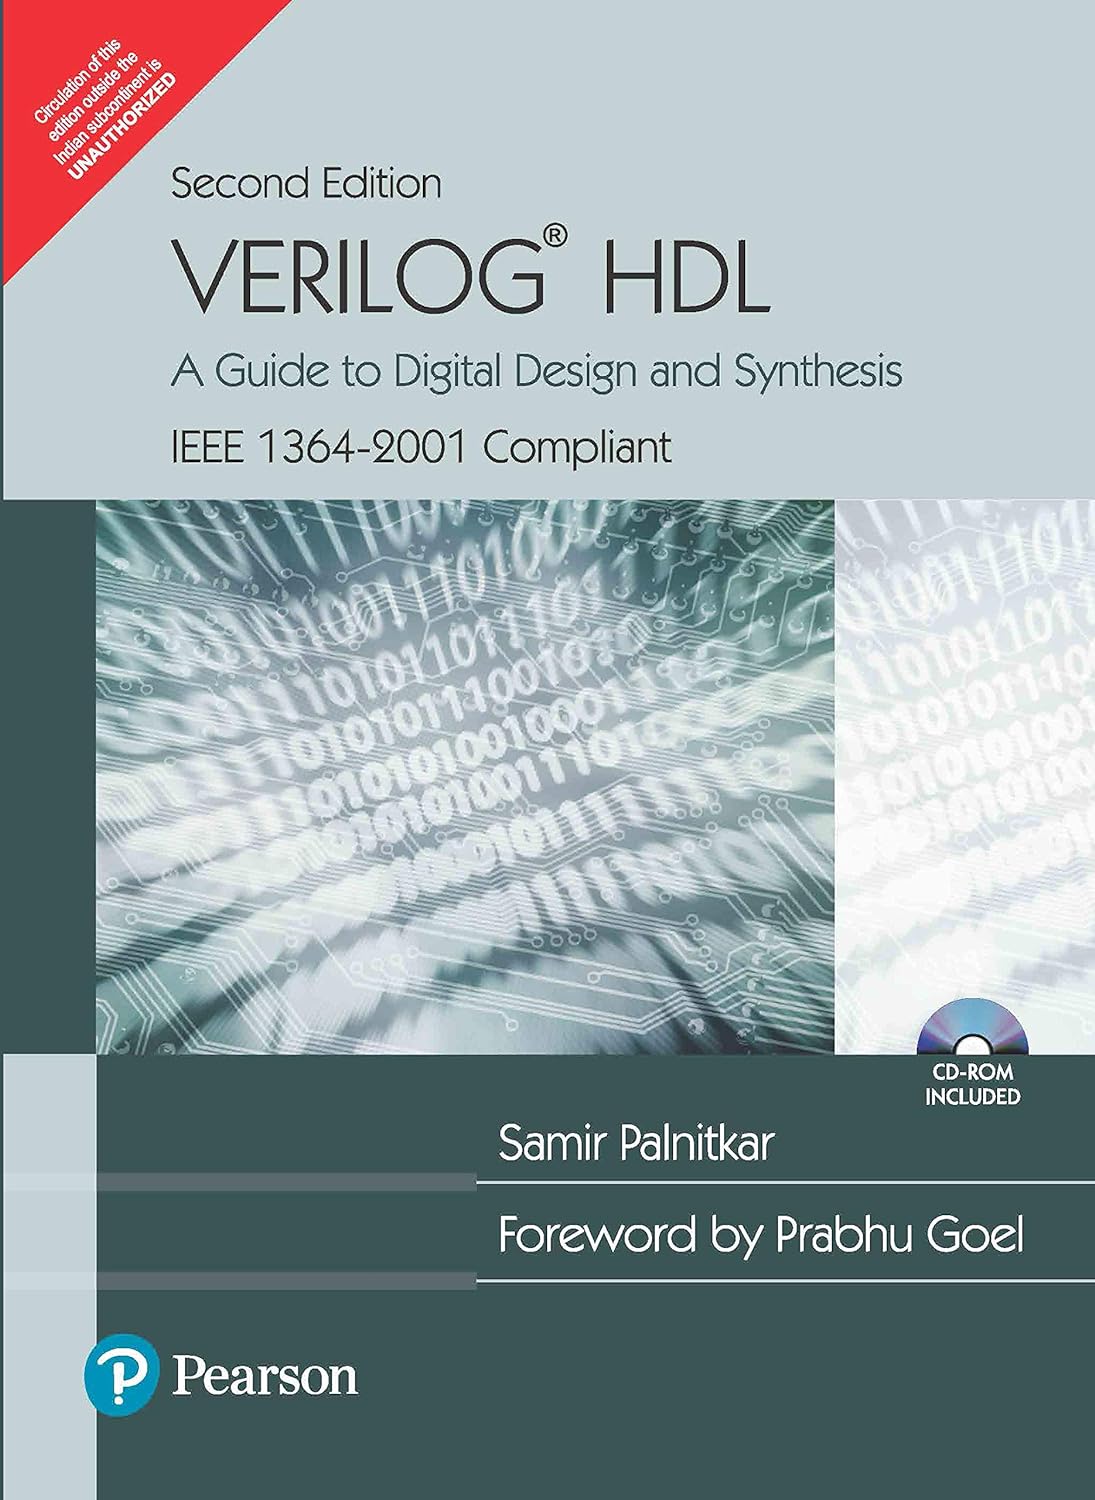 Verilog HDL A Guide to Digital Design and Synthesis